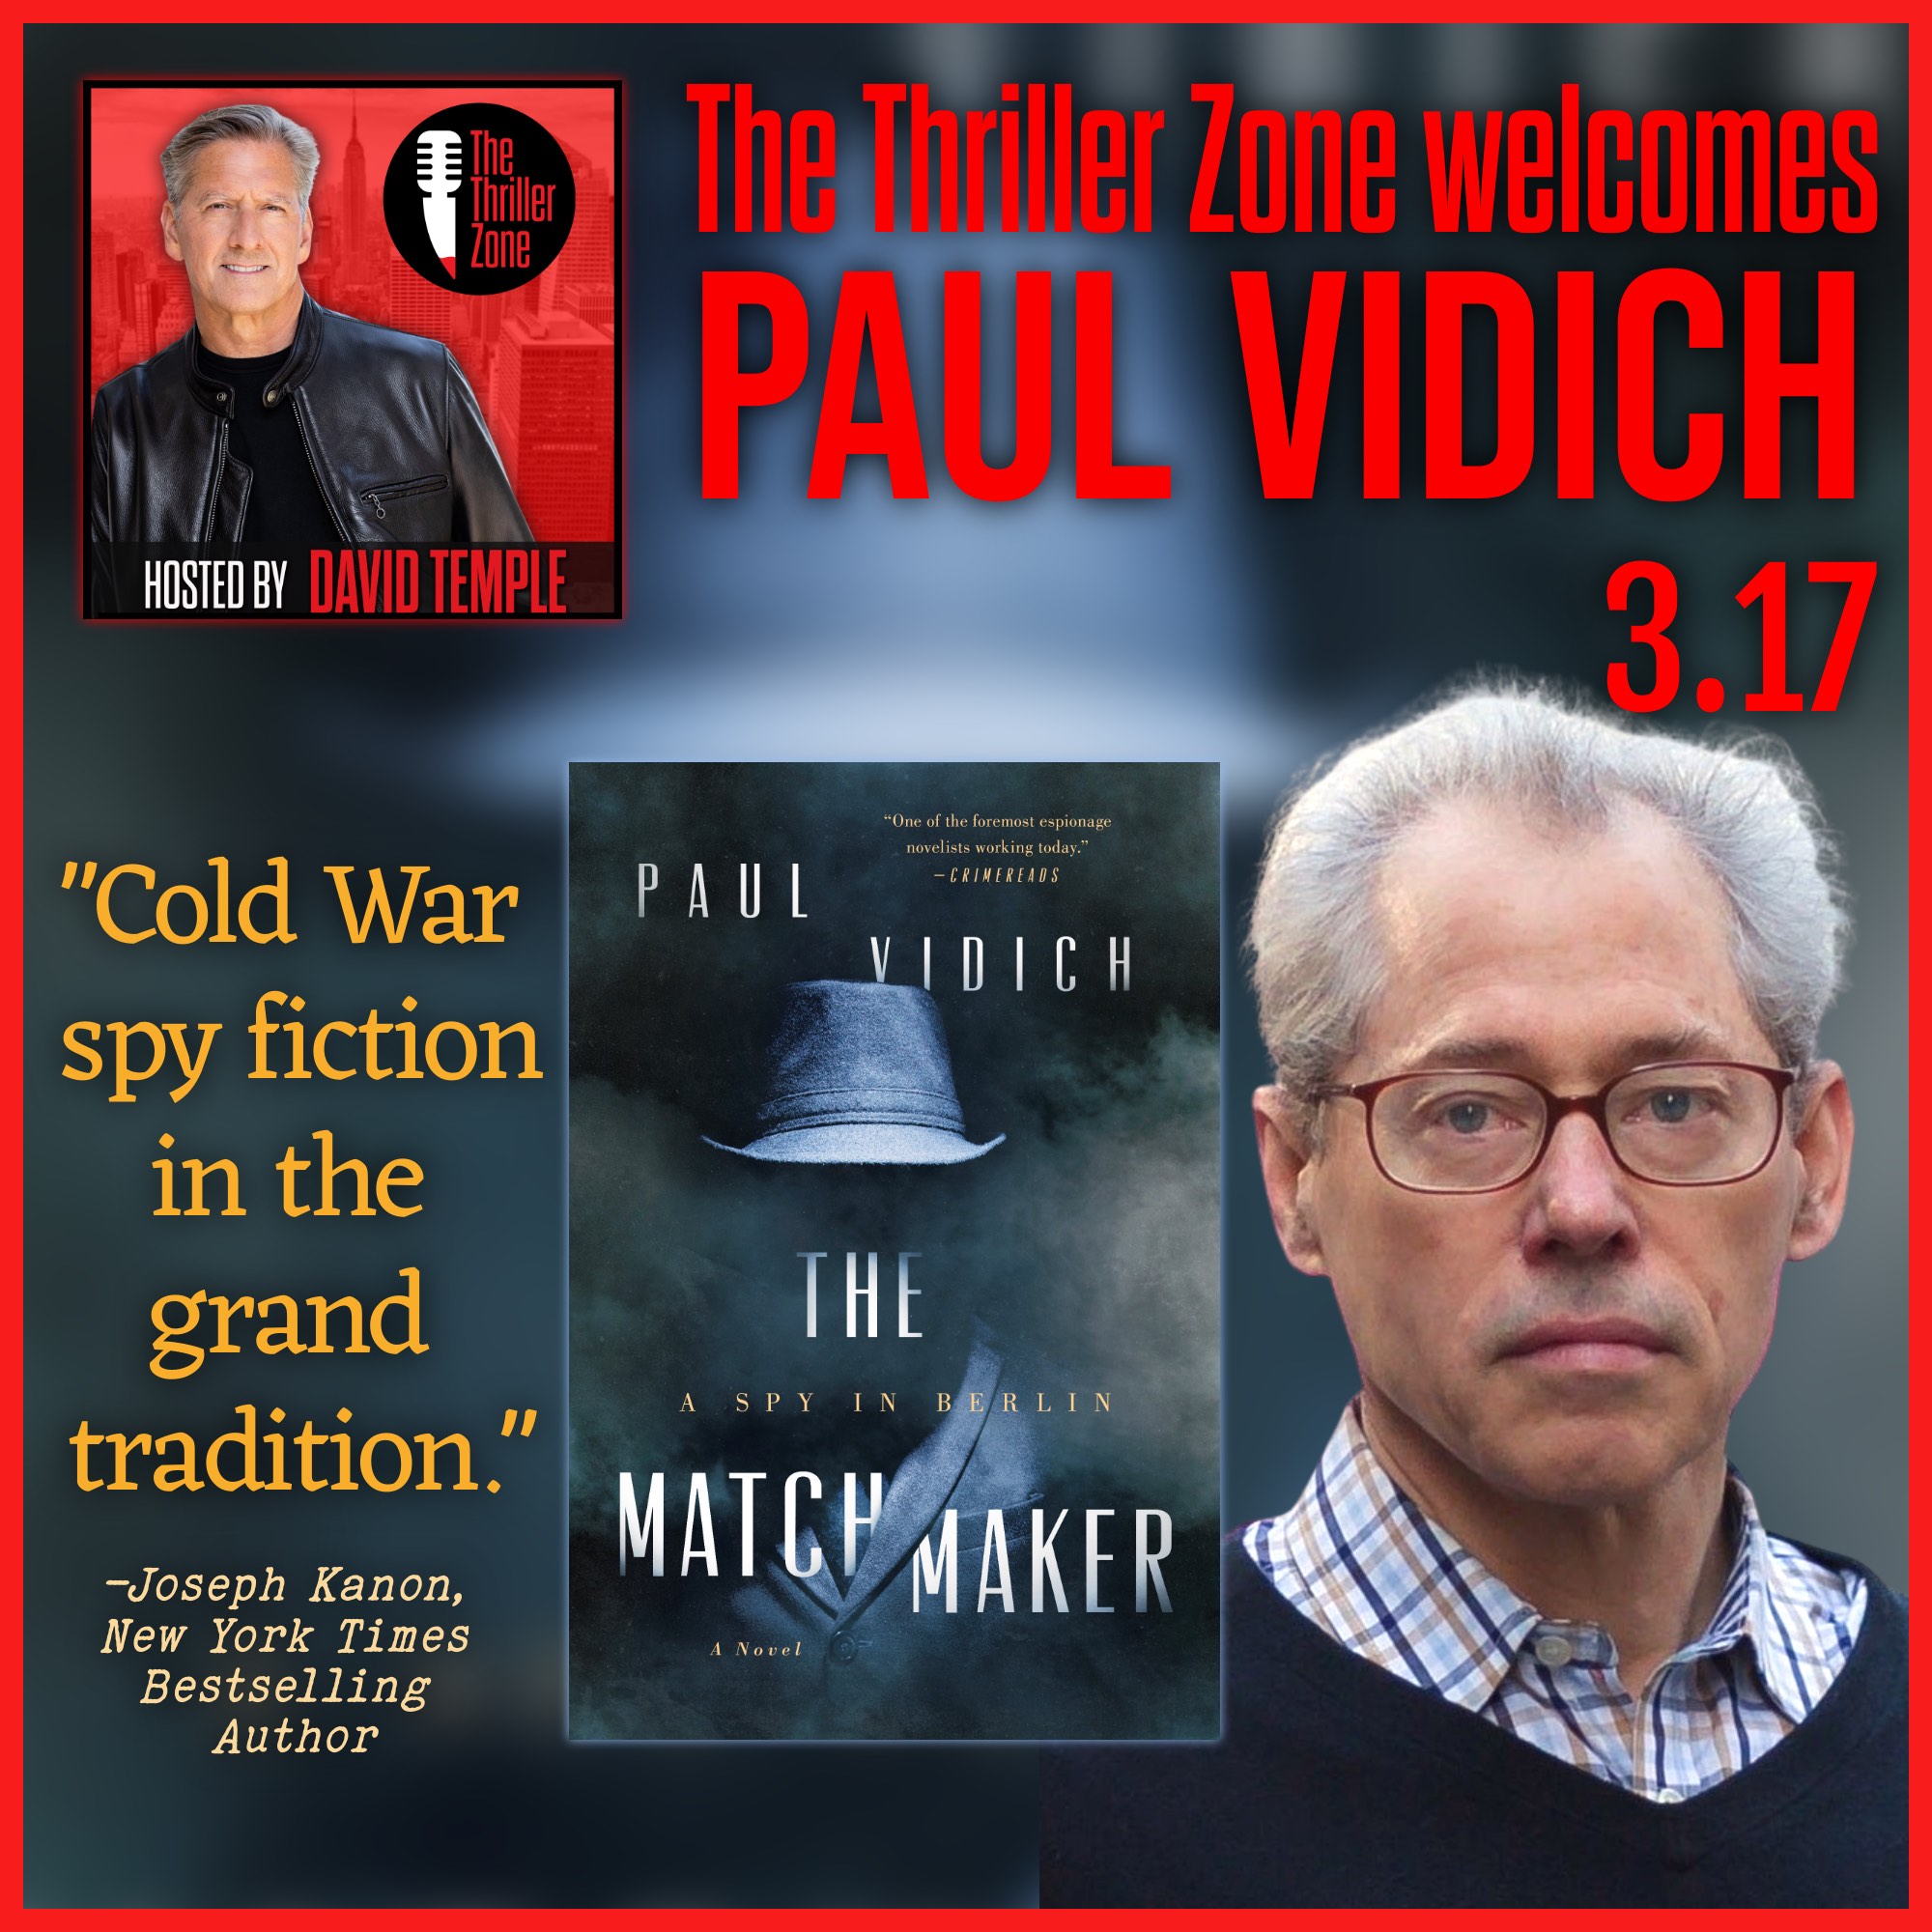 Paul Vidich, author of The MatchMaker Image